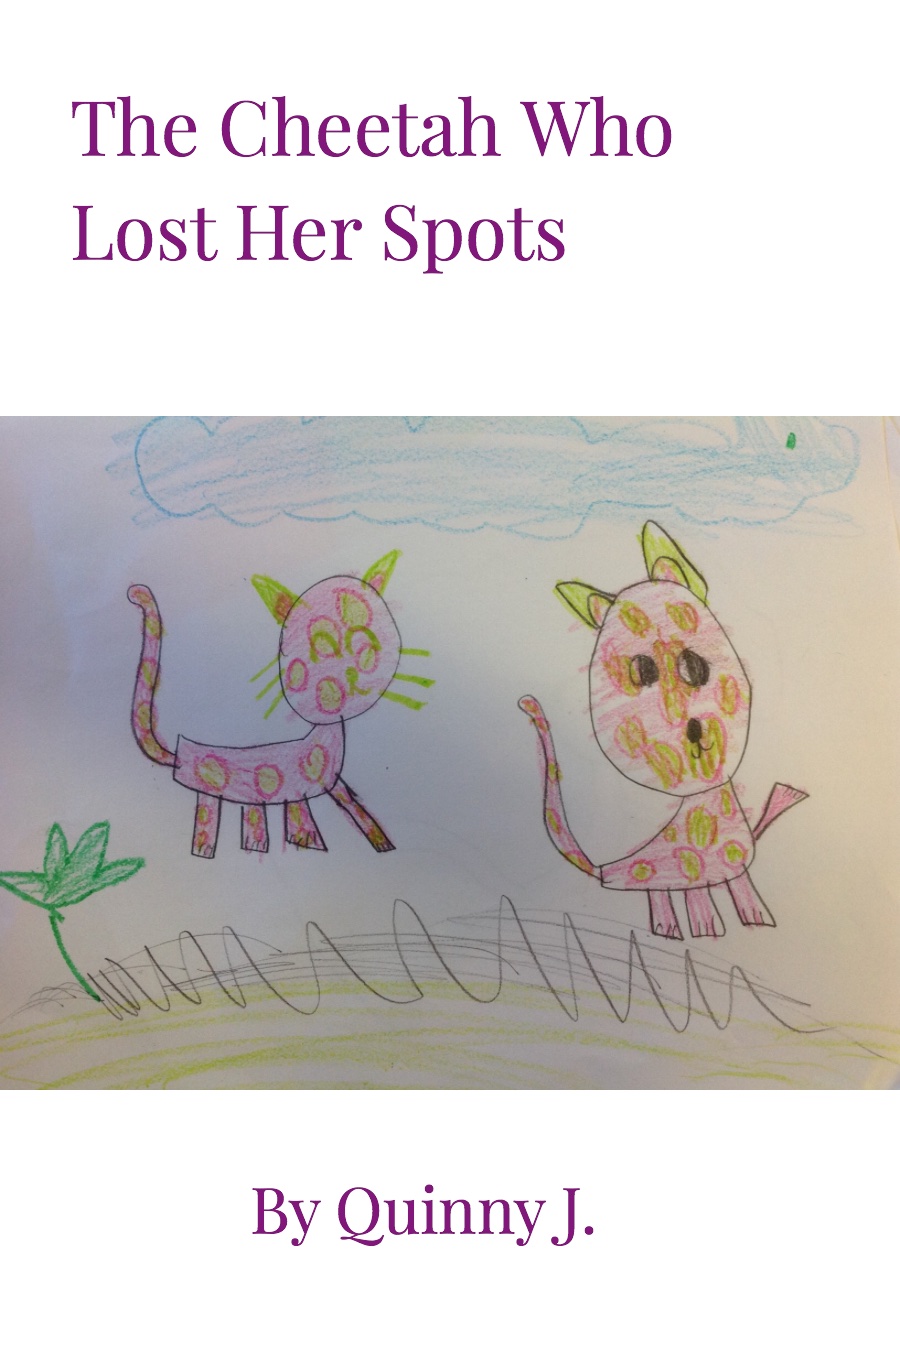 The Cheetah Who Lost Her Spots by Quinn J